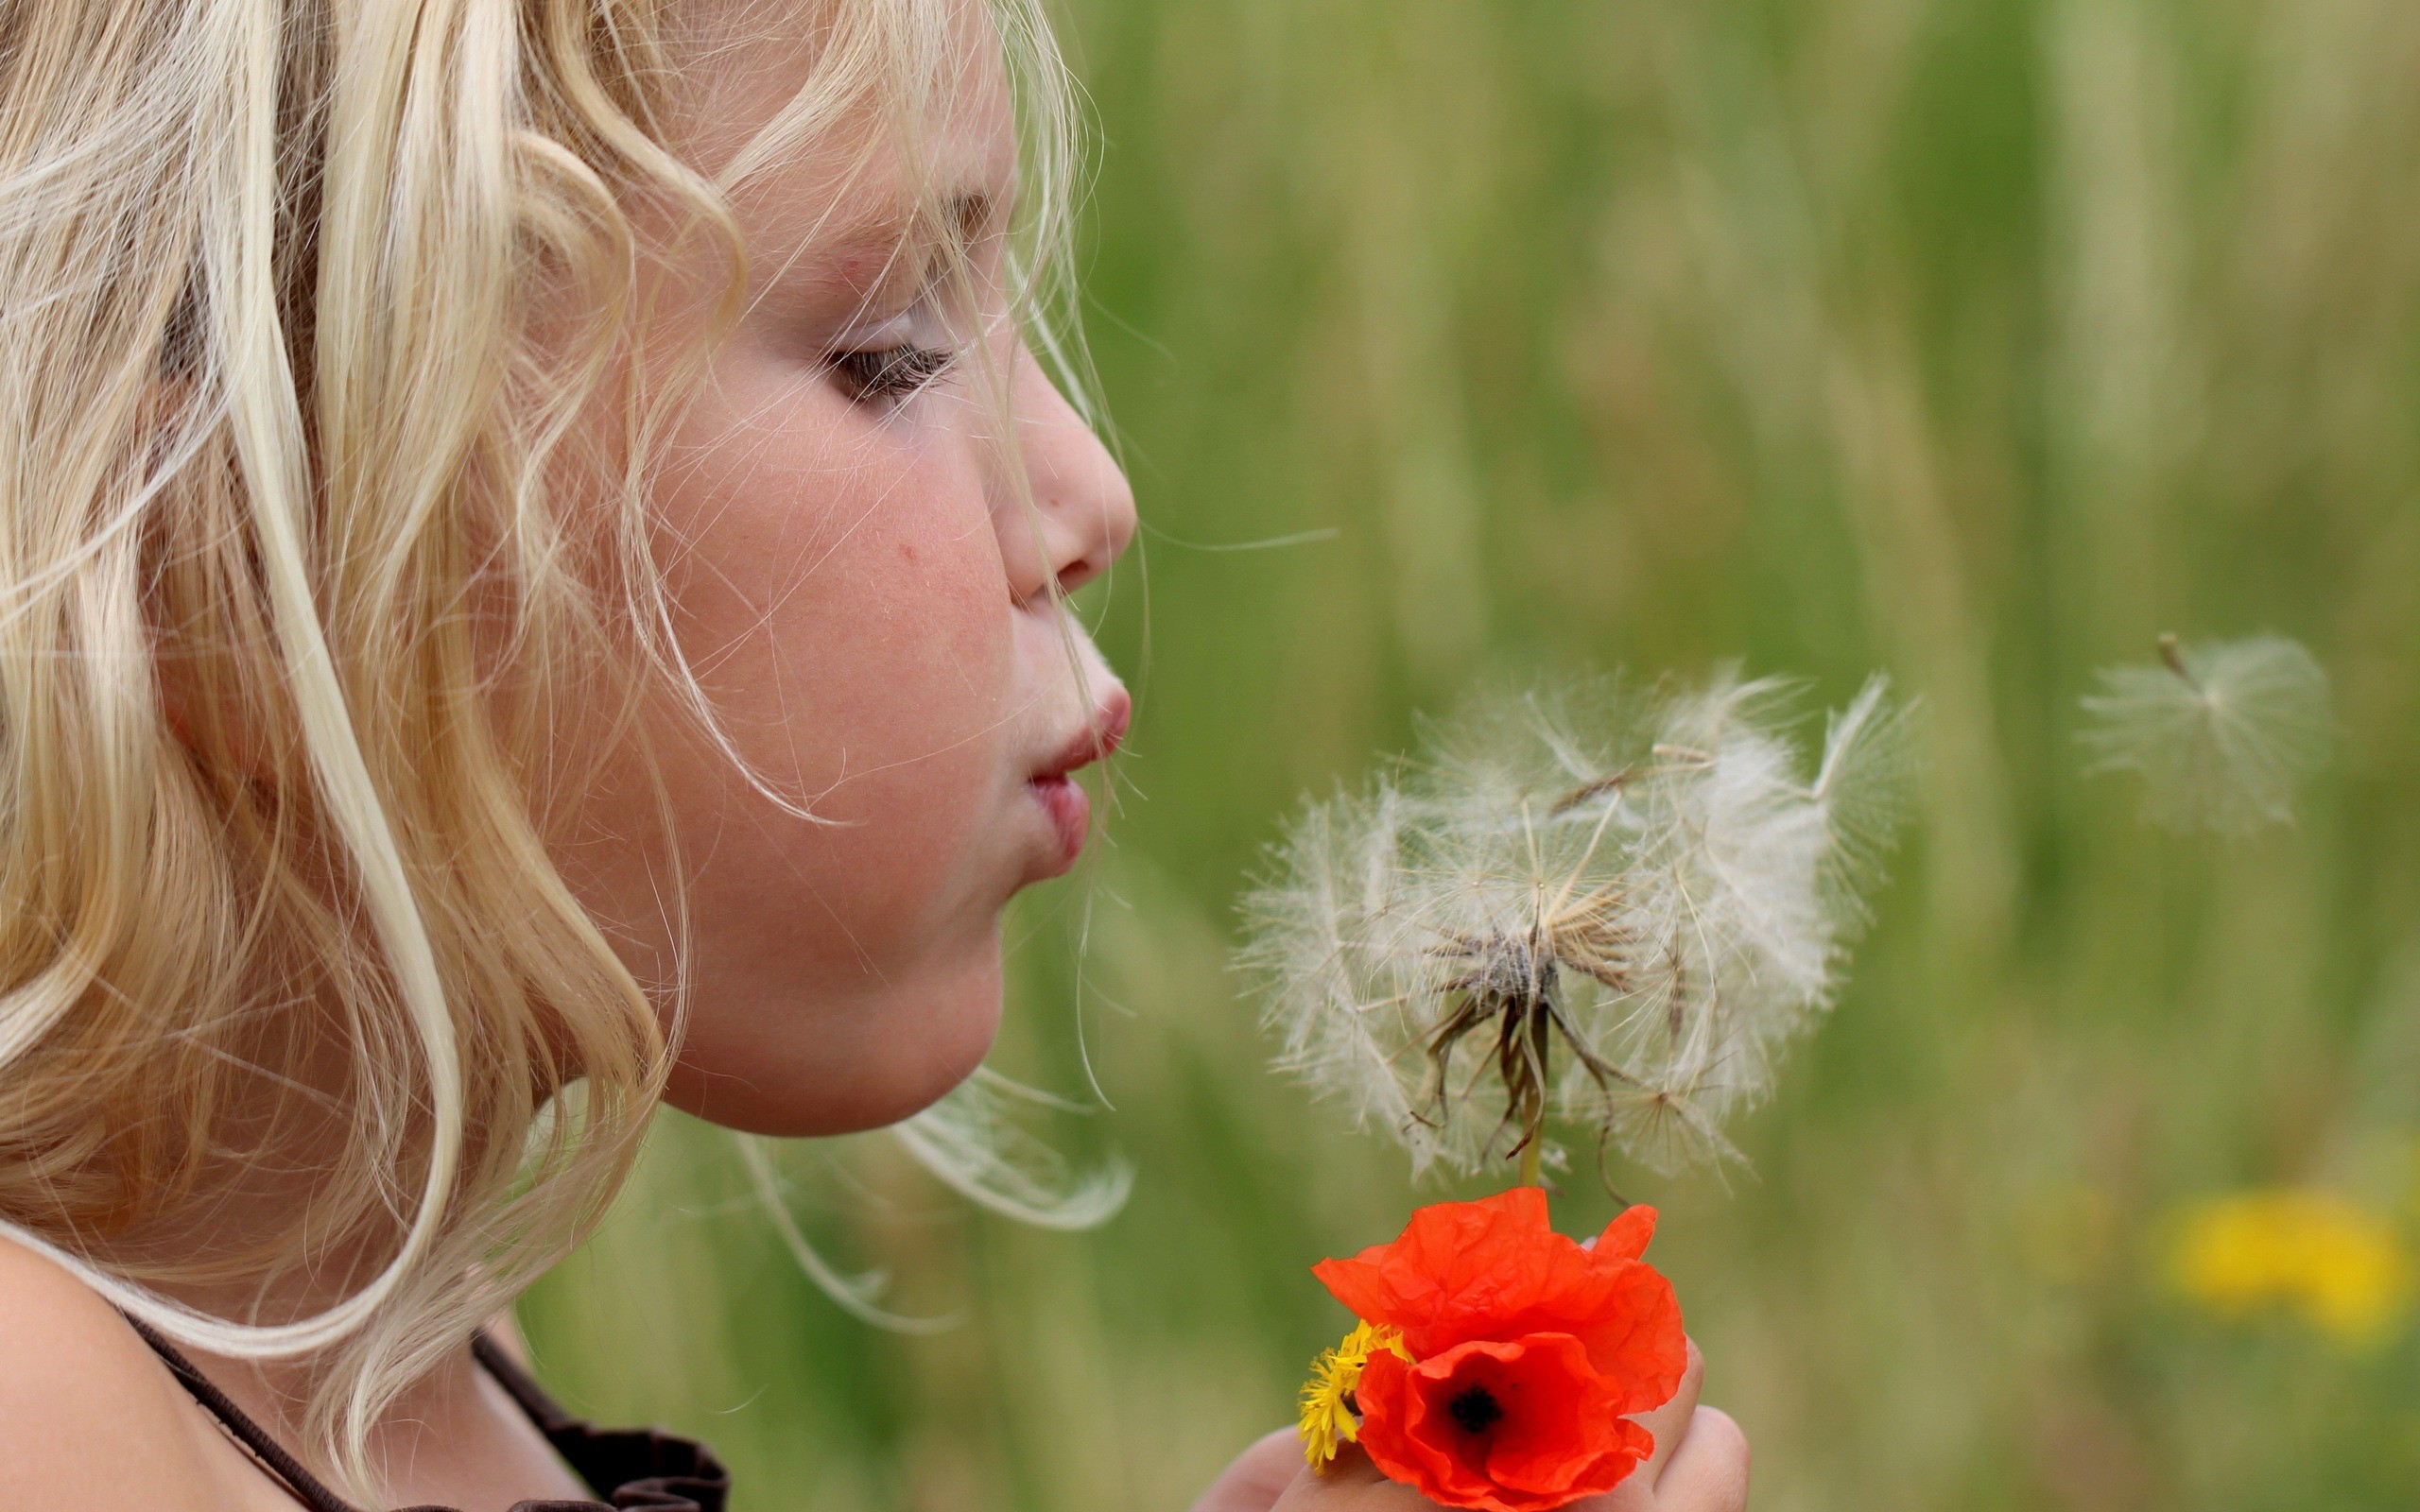 blowing on a dandelion saying